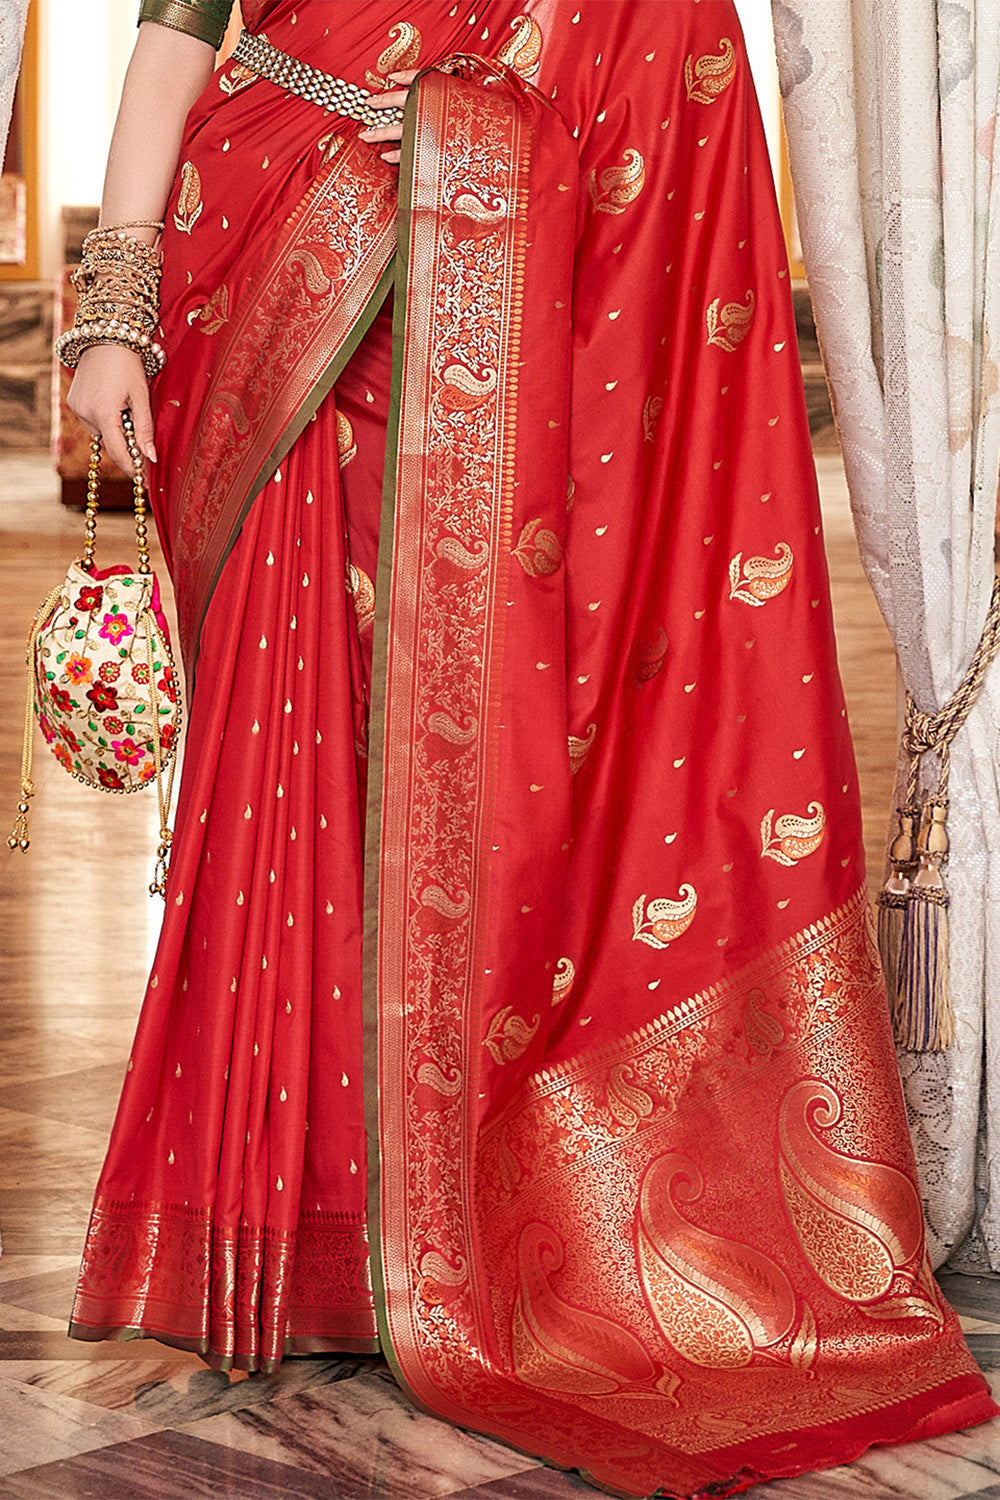 The Top 8 Wedding Saree Trends for 2024 Brides